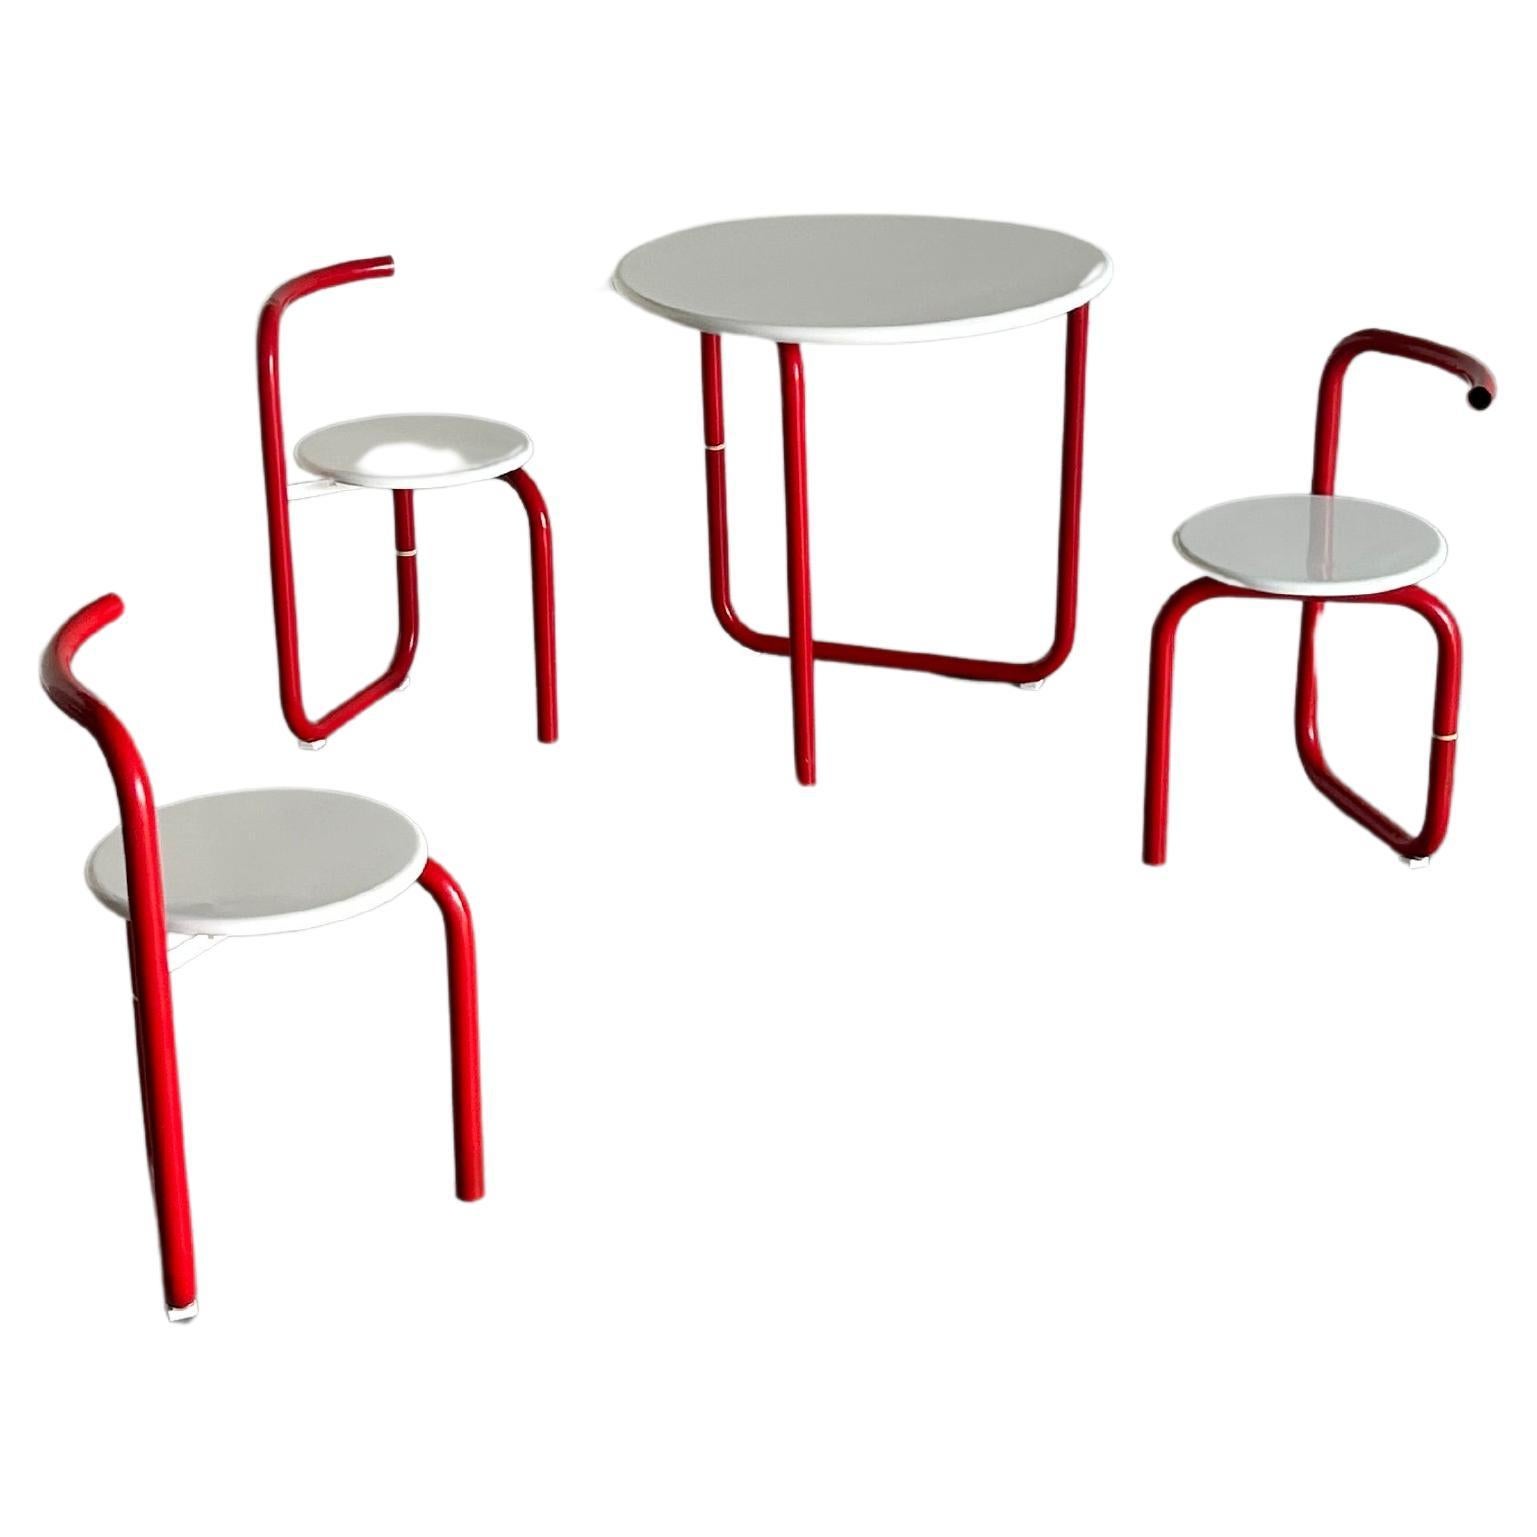 Vintage Minimalist Pop Art Garden Seating Set, Folding Chairs and Table, 1970s